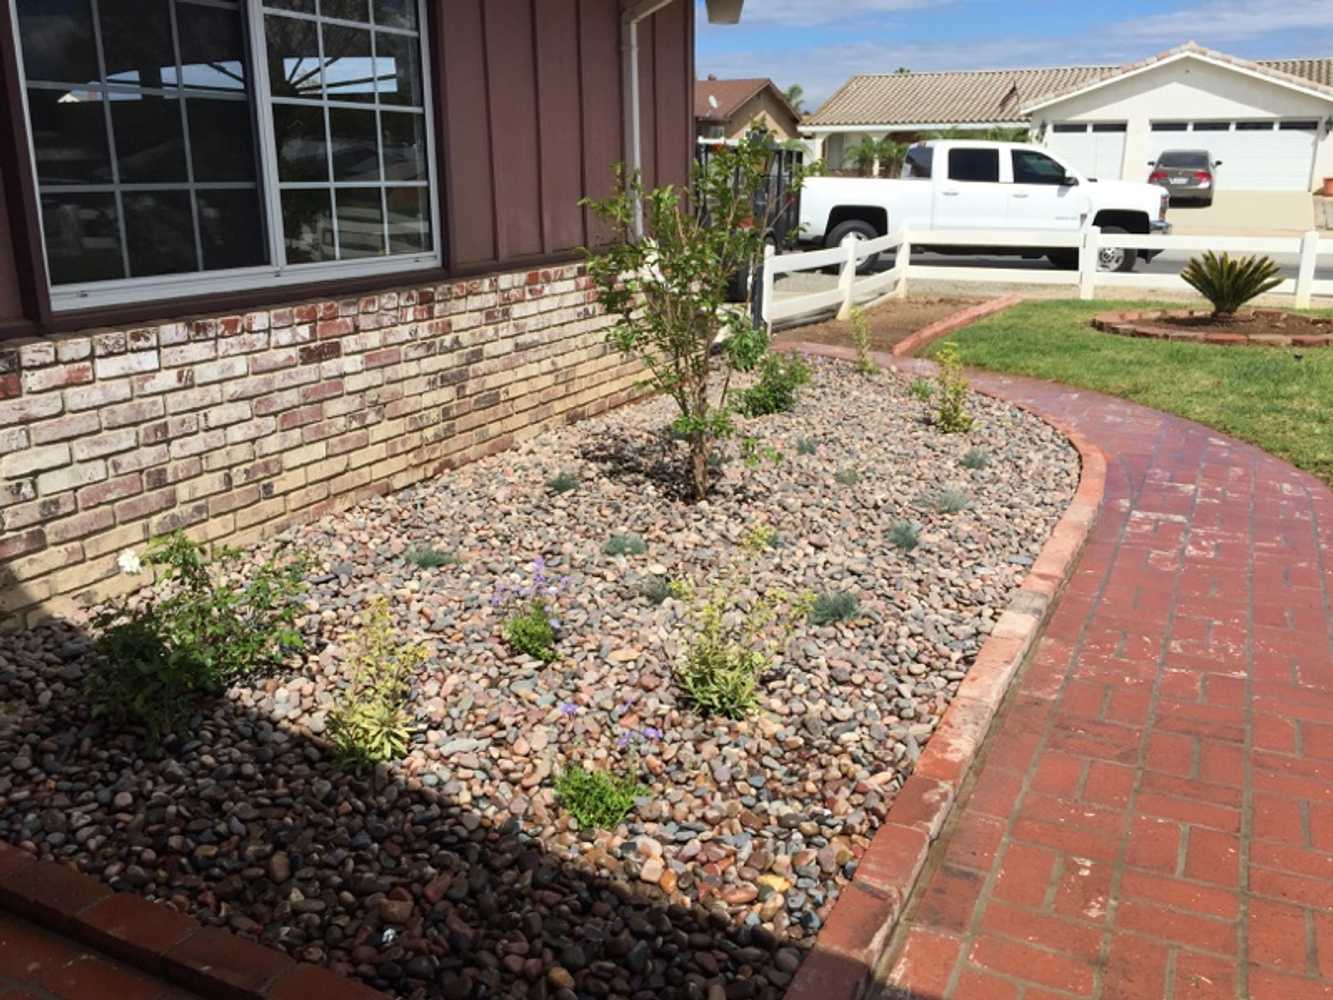 Photos from Marroquin S Landscaping & Maintenance Services Inc